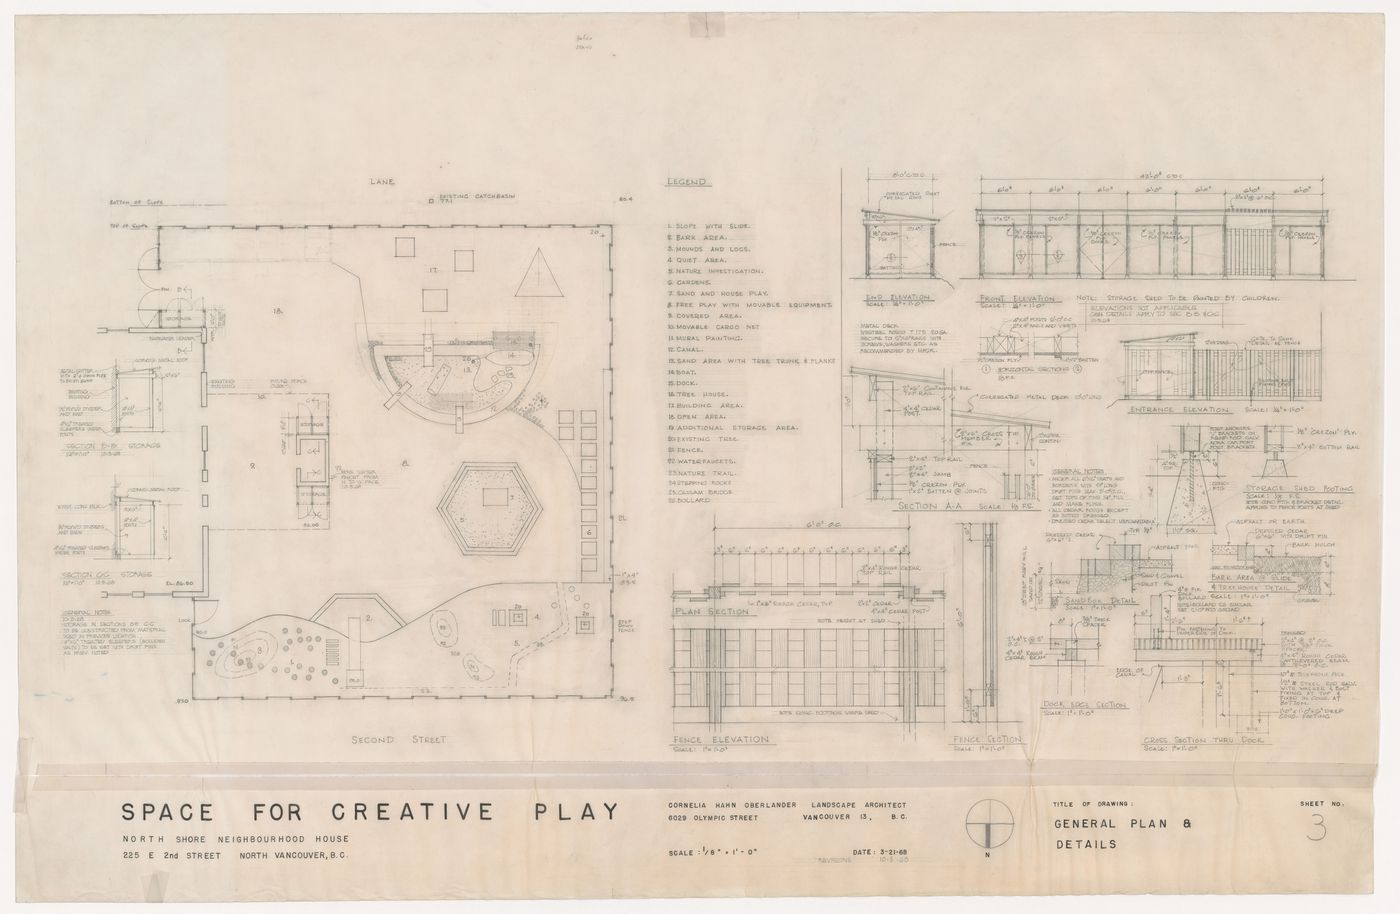 Site plan, elevations, and sections for North Shore Neighbourhood House Playground, Vancouver, British Columbia